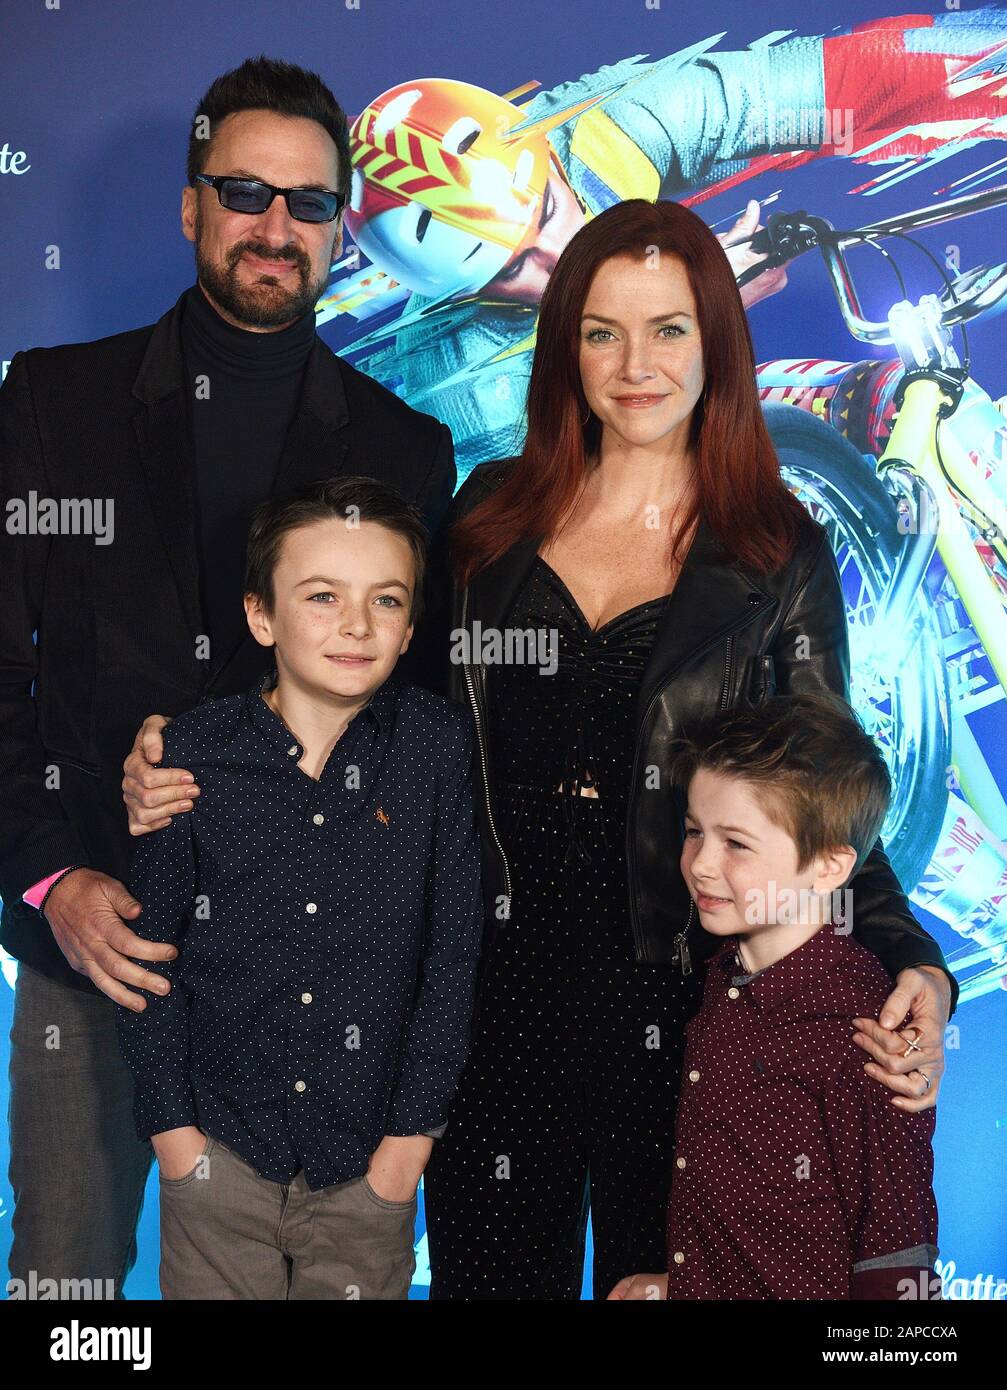 Los Angeles, USA. 21st Jan, 2020. LOS ANGELES, CALIFORNIA - JANUARY 21: Annie Wersching and Family attends the LA Premiere of Cirque Du Soleil's 'Volta' at Dodger Stadium on January 21, 2020 in Los Angeles, California. Photo: Annie Lesser/imageSPACE Credit: Imagespace/Alamy Live News Stock Photo